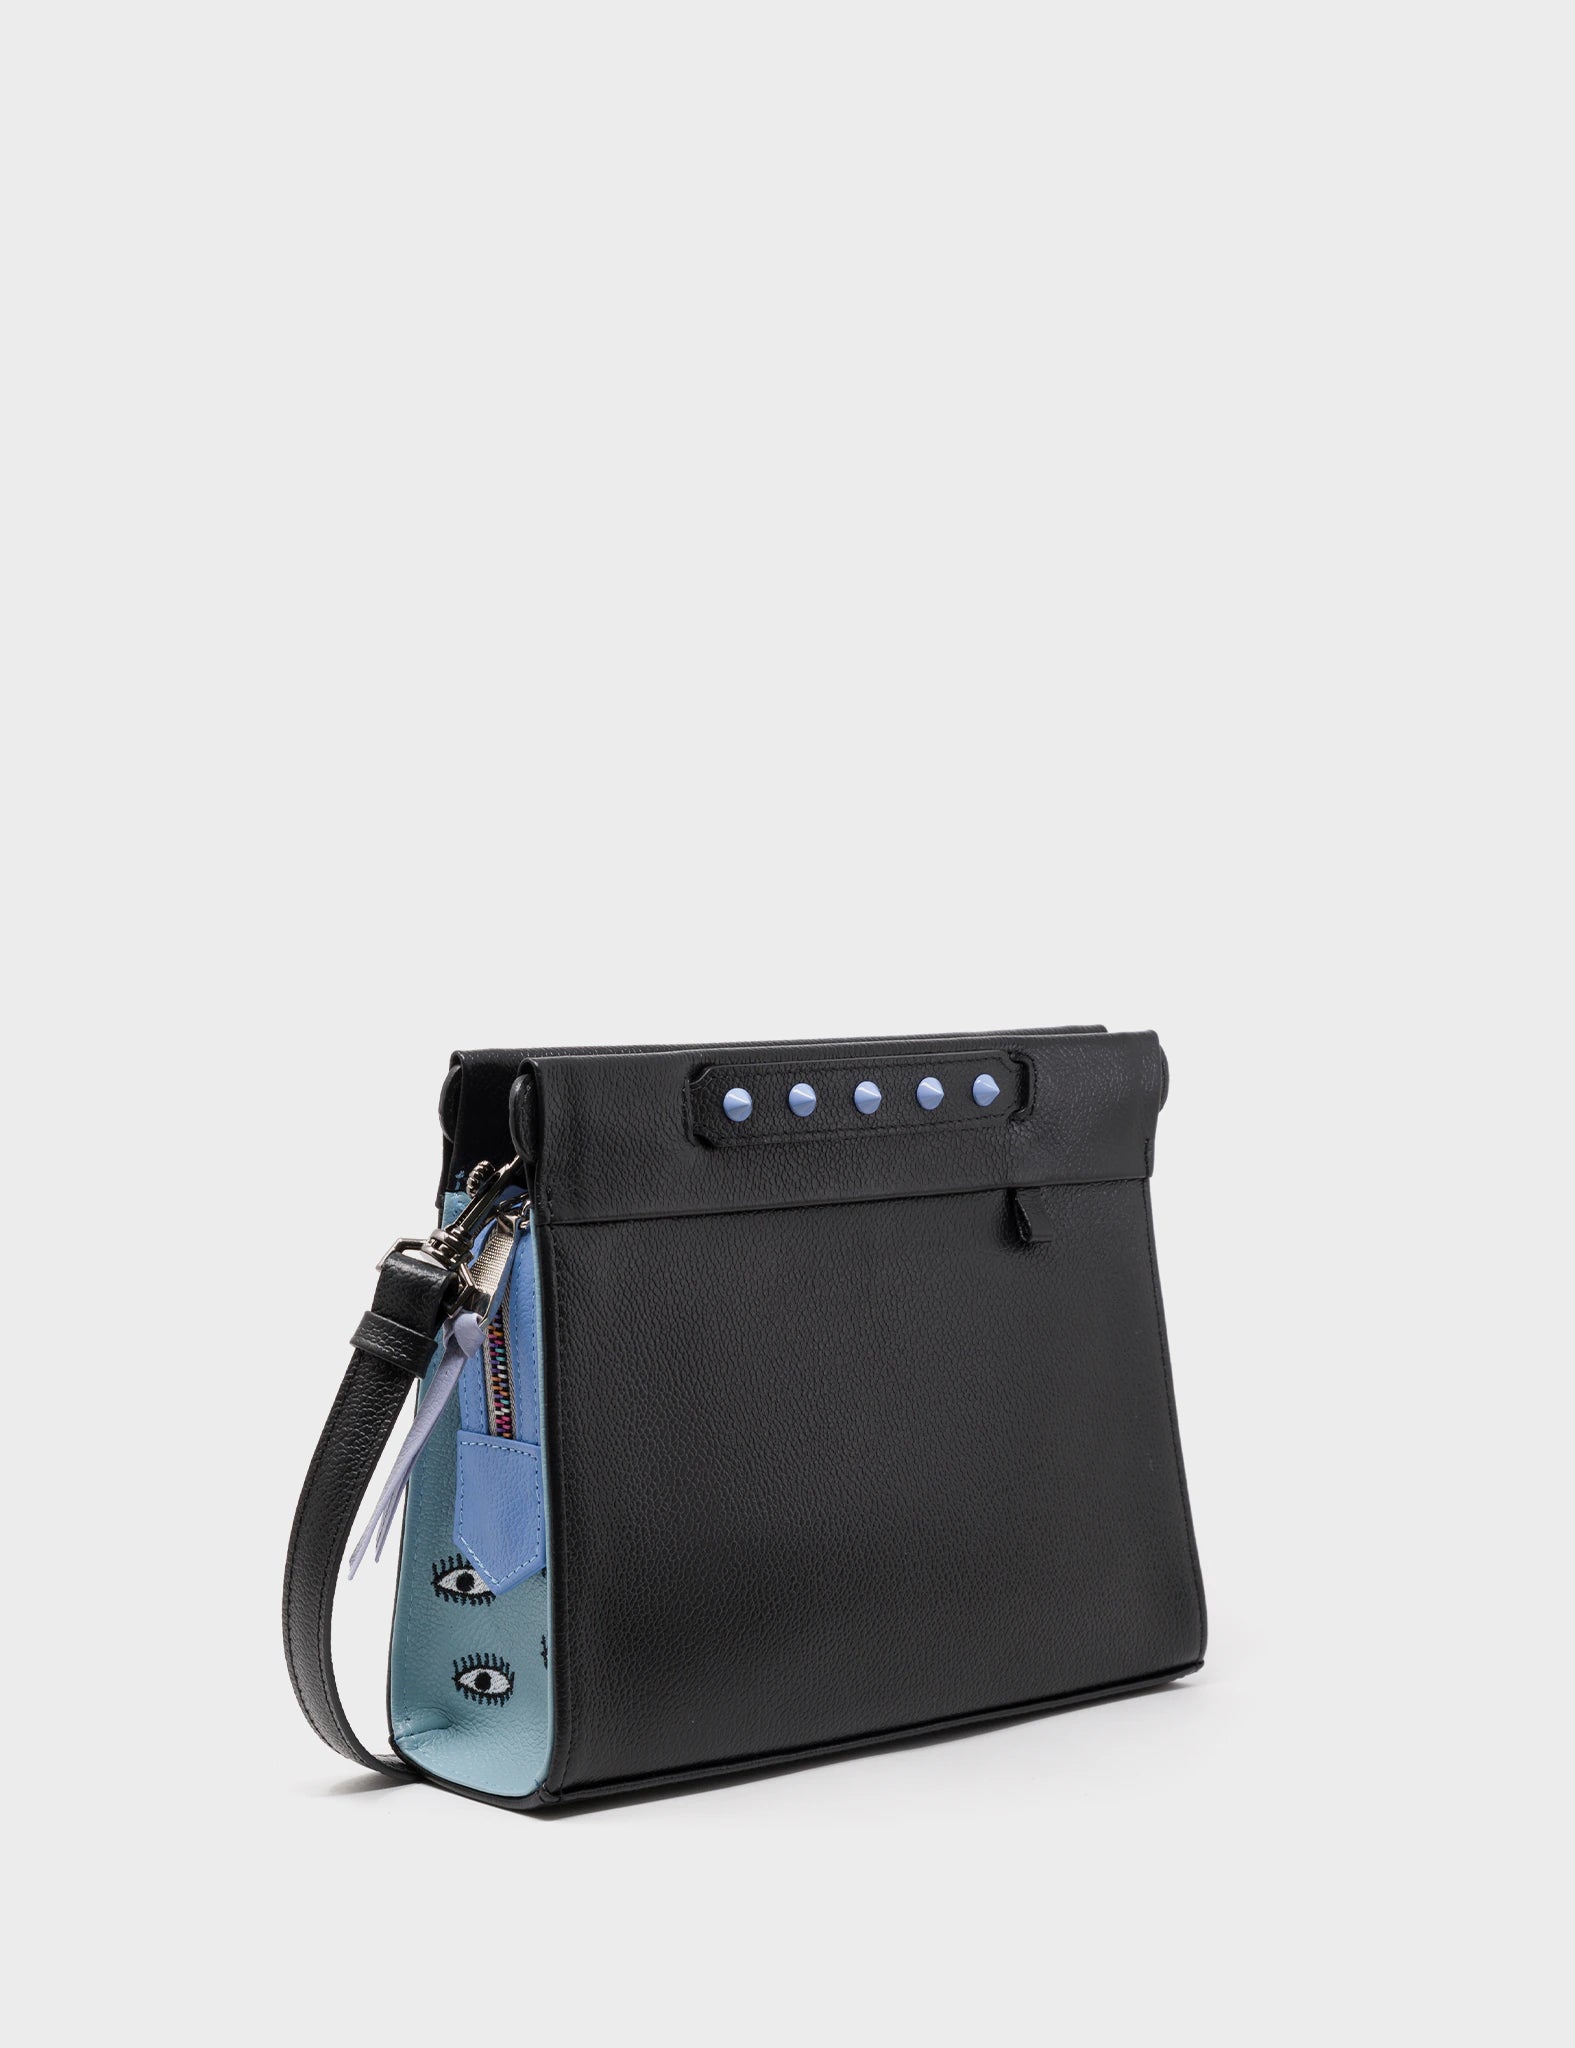 Vali Crossbody Black and Blue Leather Bag - All Over Eyes Embroidery